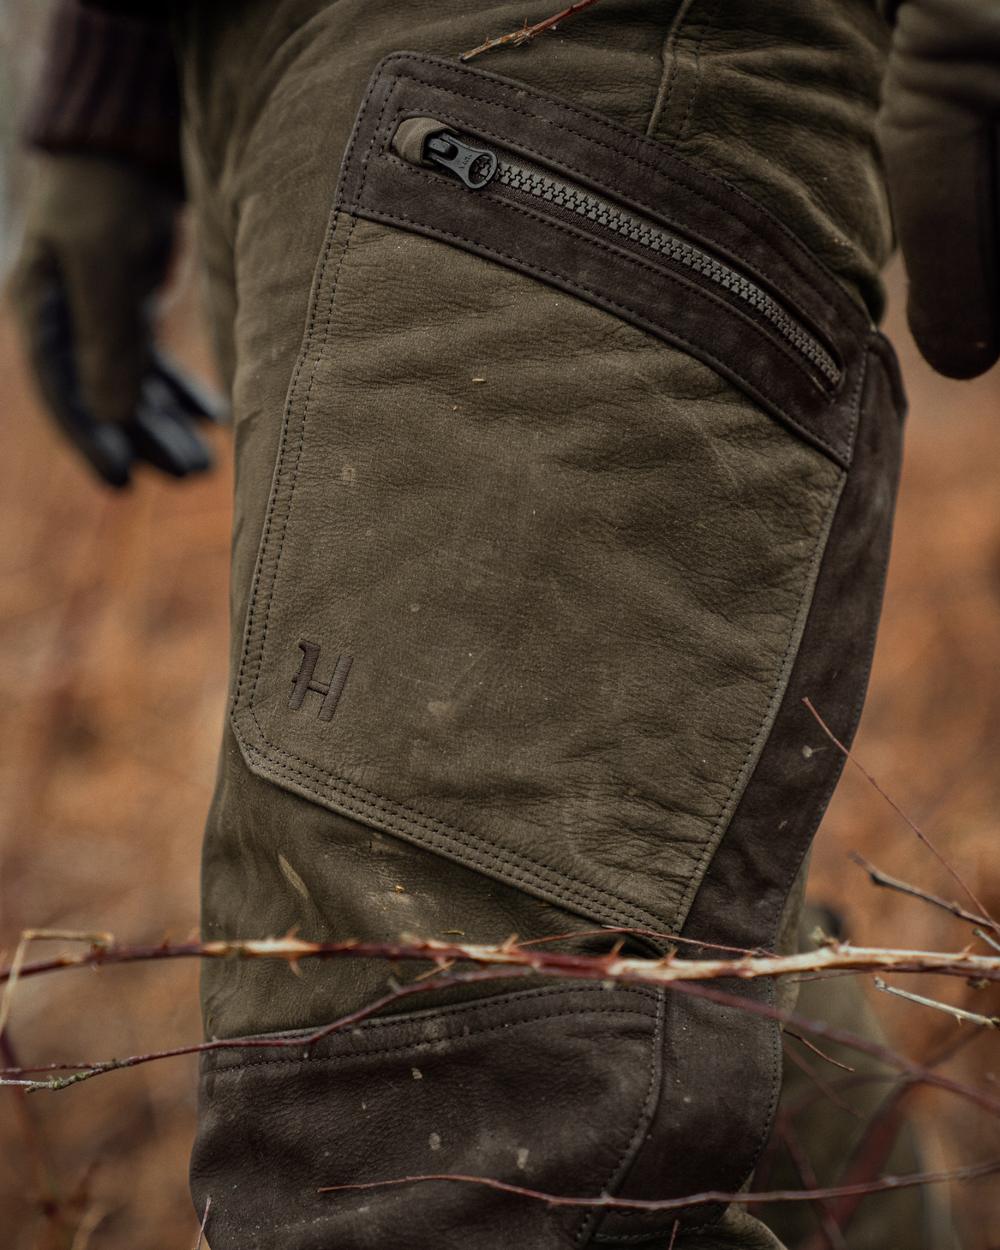 Willow Green coloured Harkila Pro Hunter Leather Trousers worn during a hunt